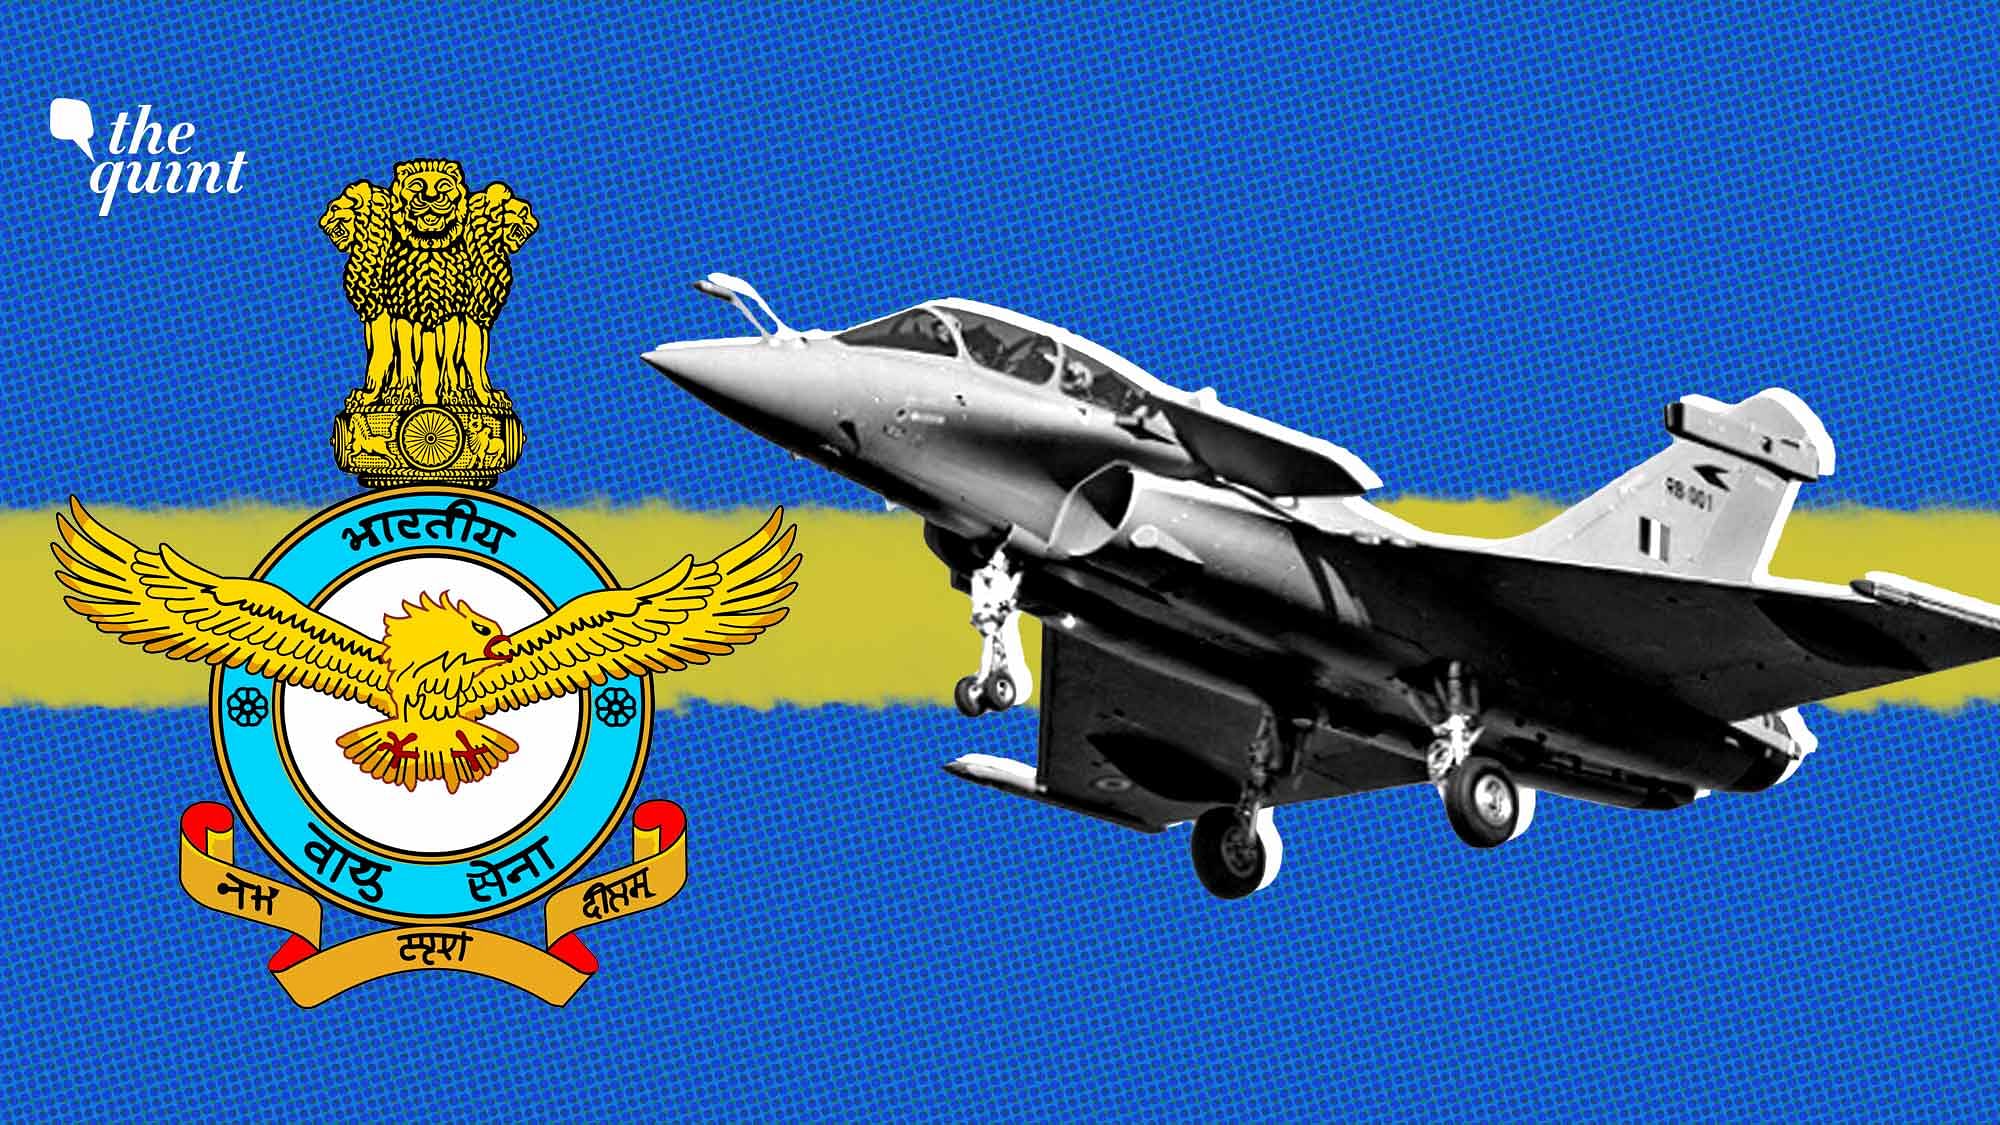 Image of a Rafale aircraft and IAF logo used for representational purposes.